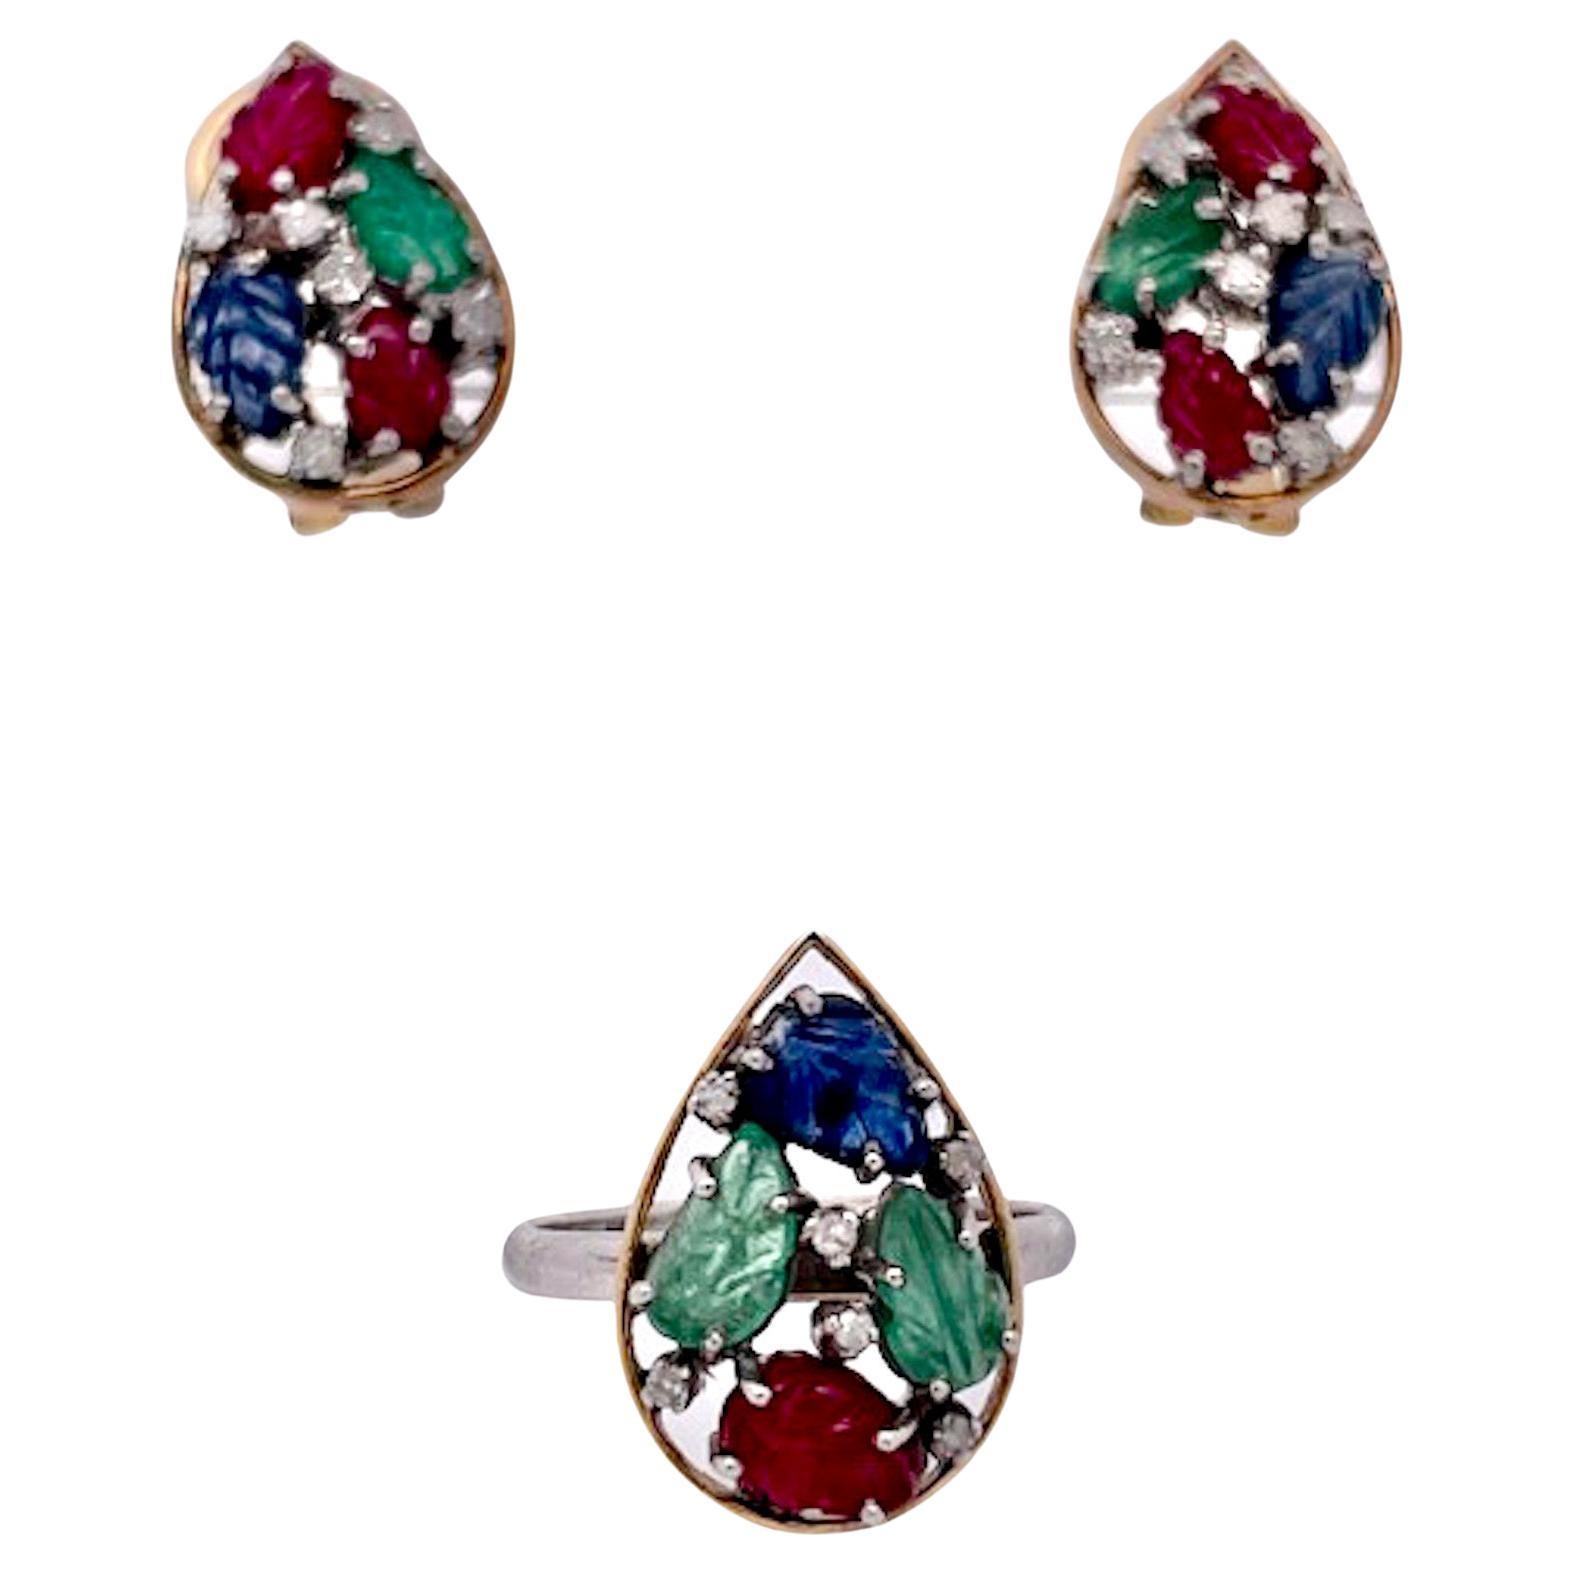 I purchased this set from an auction house in the Netherlands and was so happy to get them.  This Tutti Frutti set is highly unusual as it is a matched set in 14K Gold.  The earrings are set in a teardrop setting with two (2) rubies, one (1) Emerald